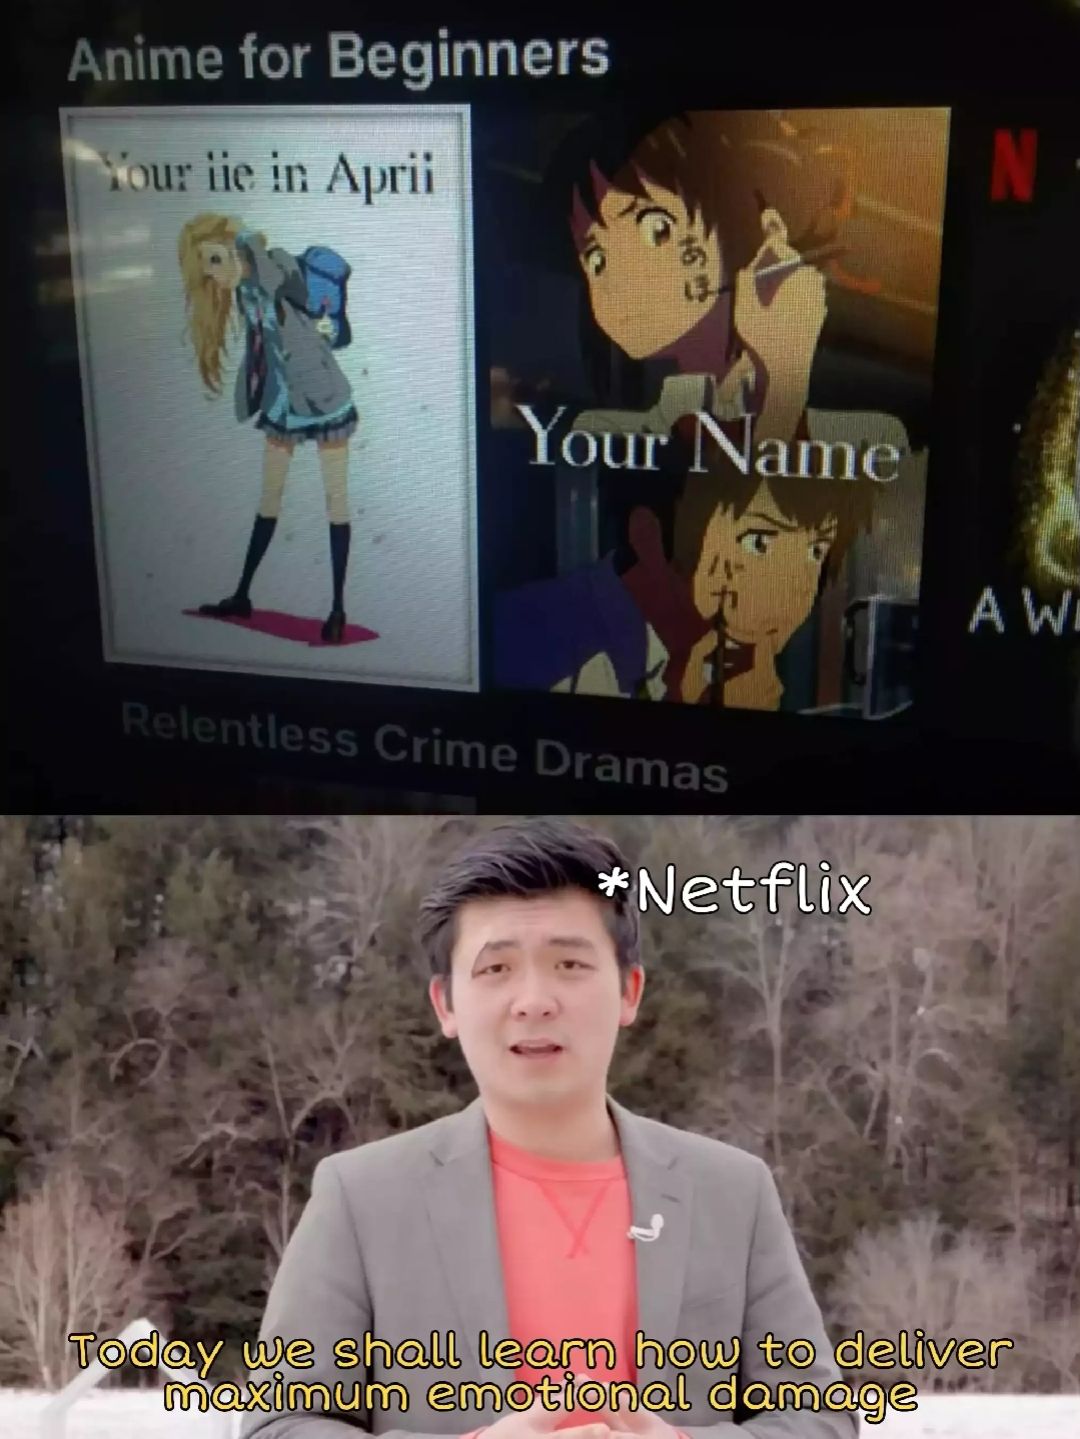 netflix did that person dirty